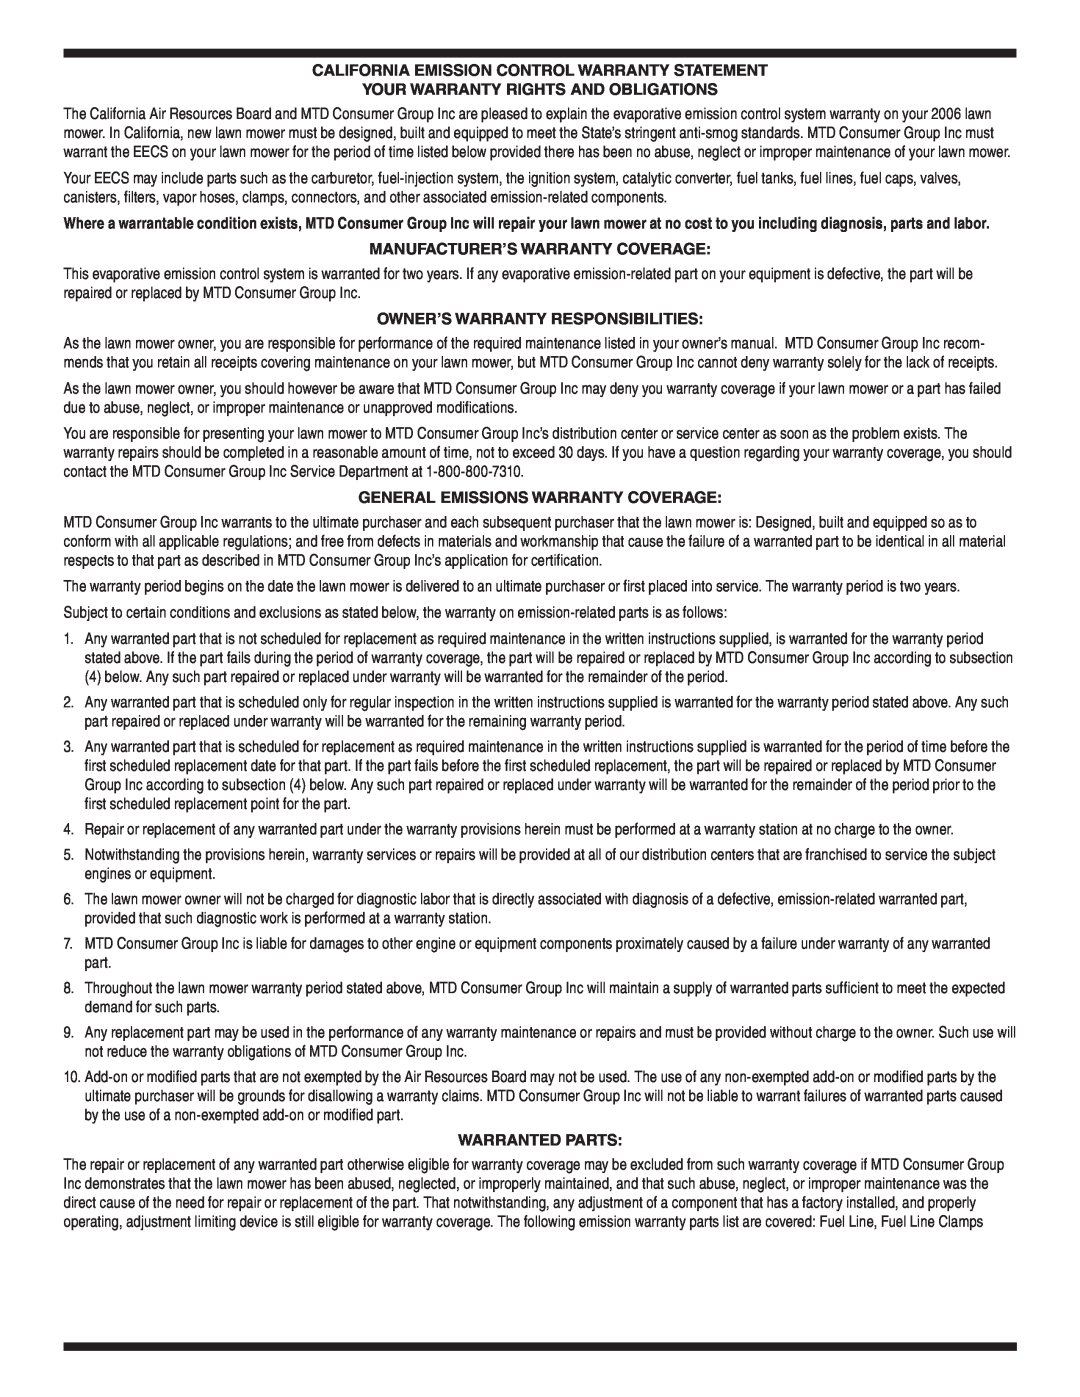 MTD 760, 779 warranty California Emission Control Warranty Statement, Your Warranty Rights And Obligations, Warranted Parts 